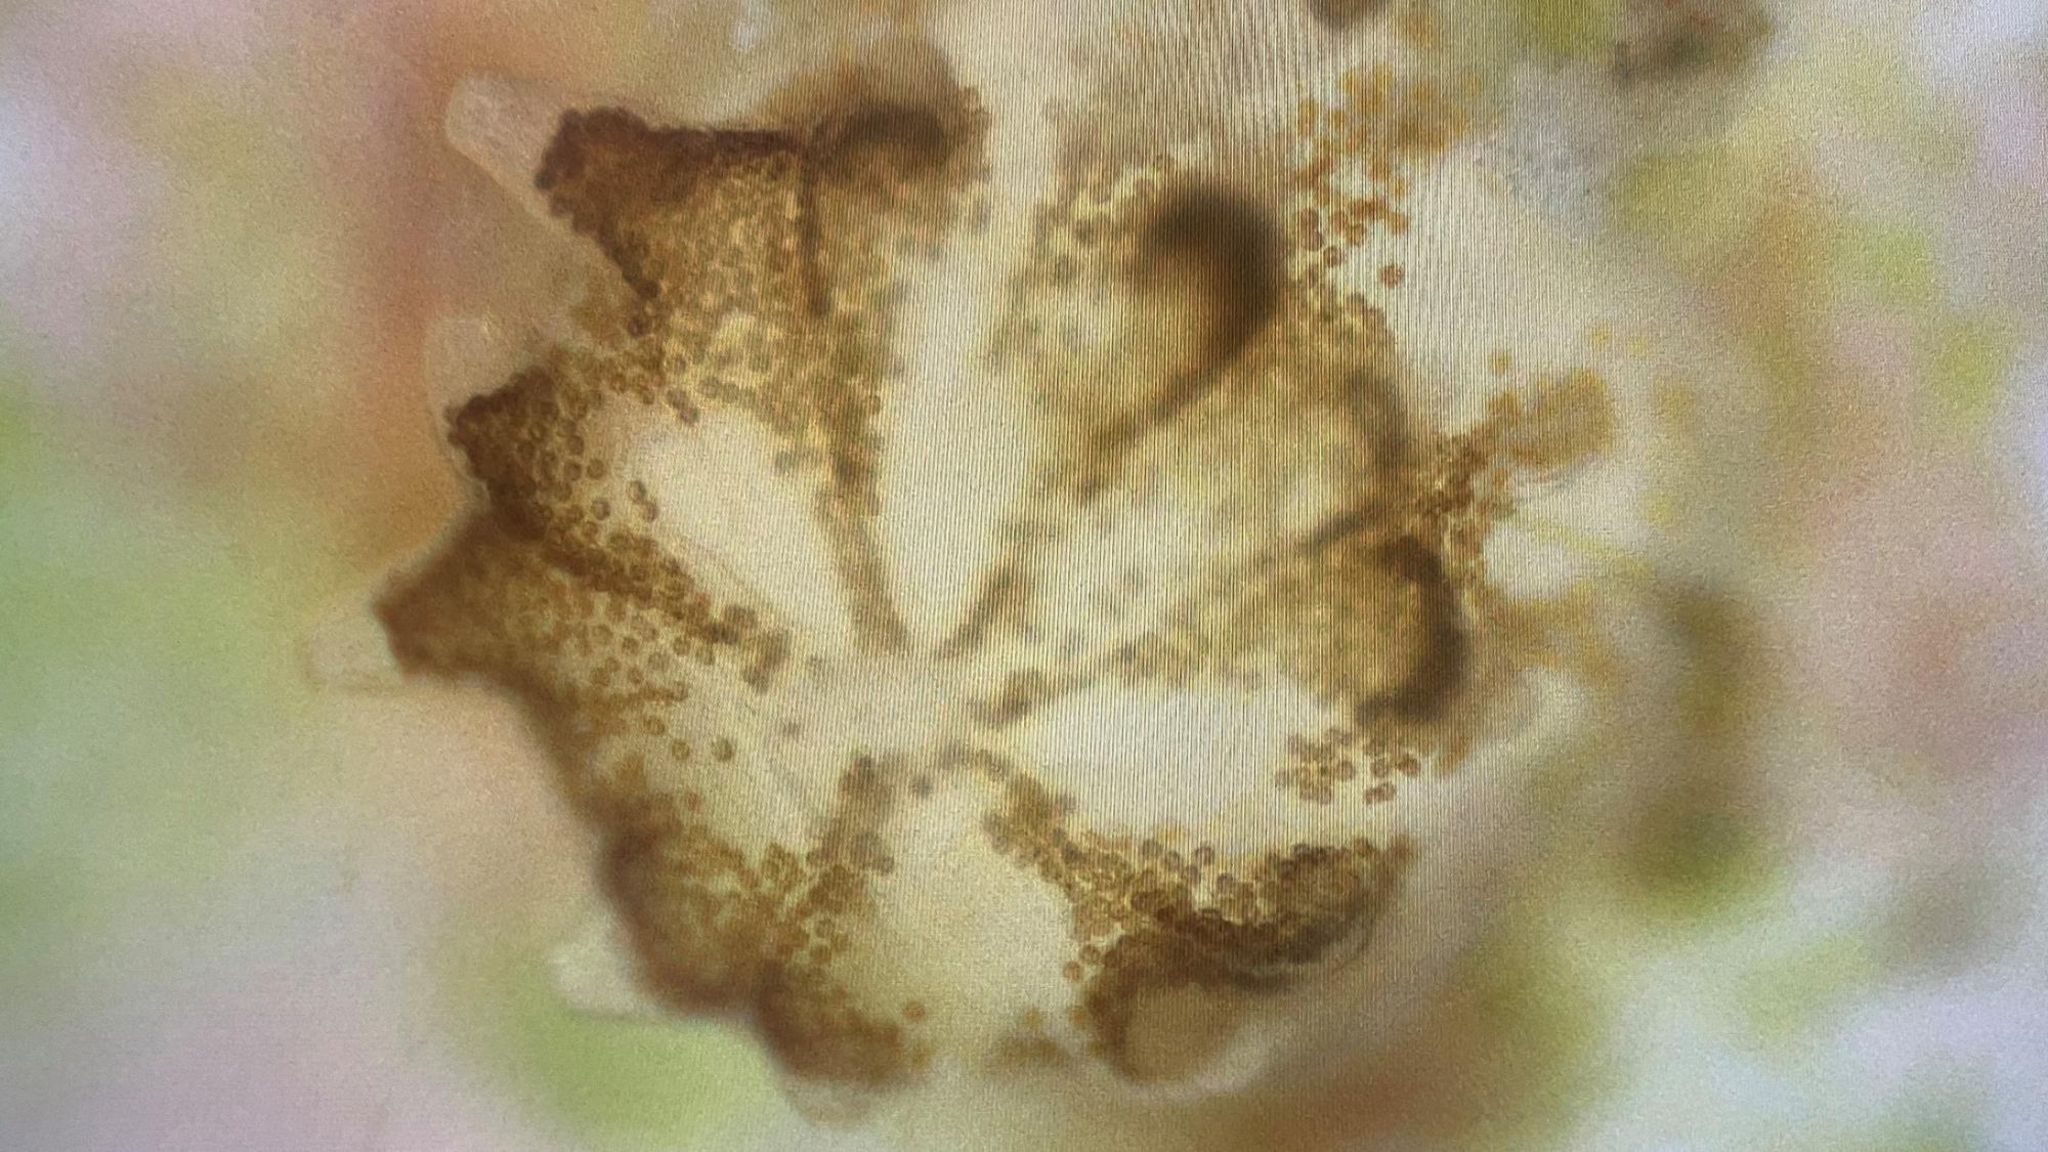 A coral specimen as seen by microscope